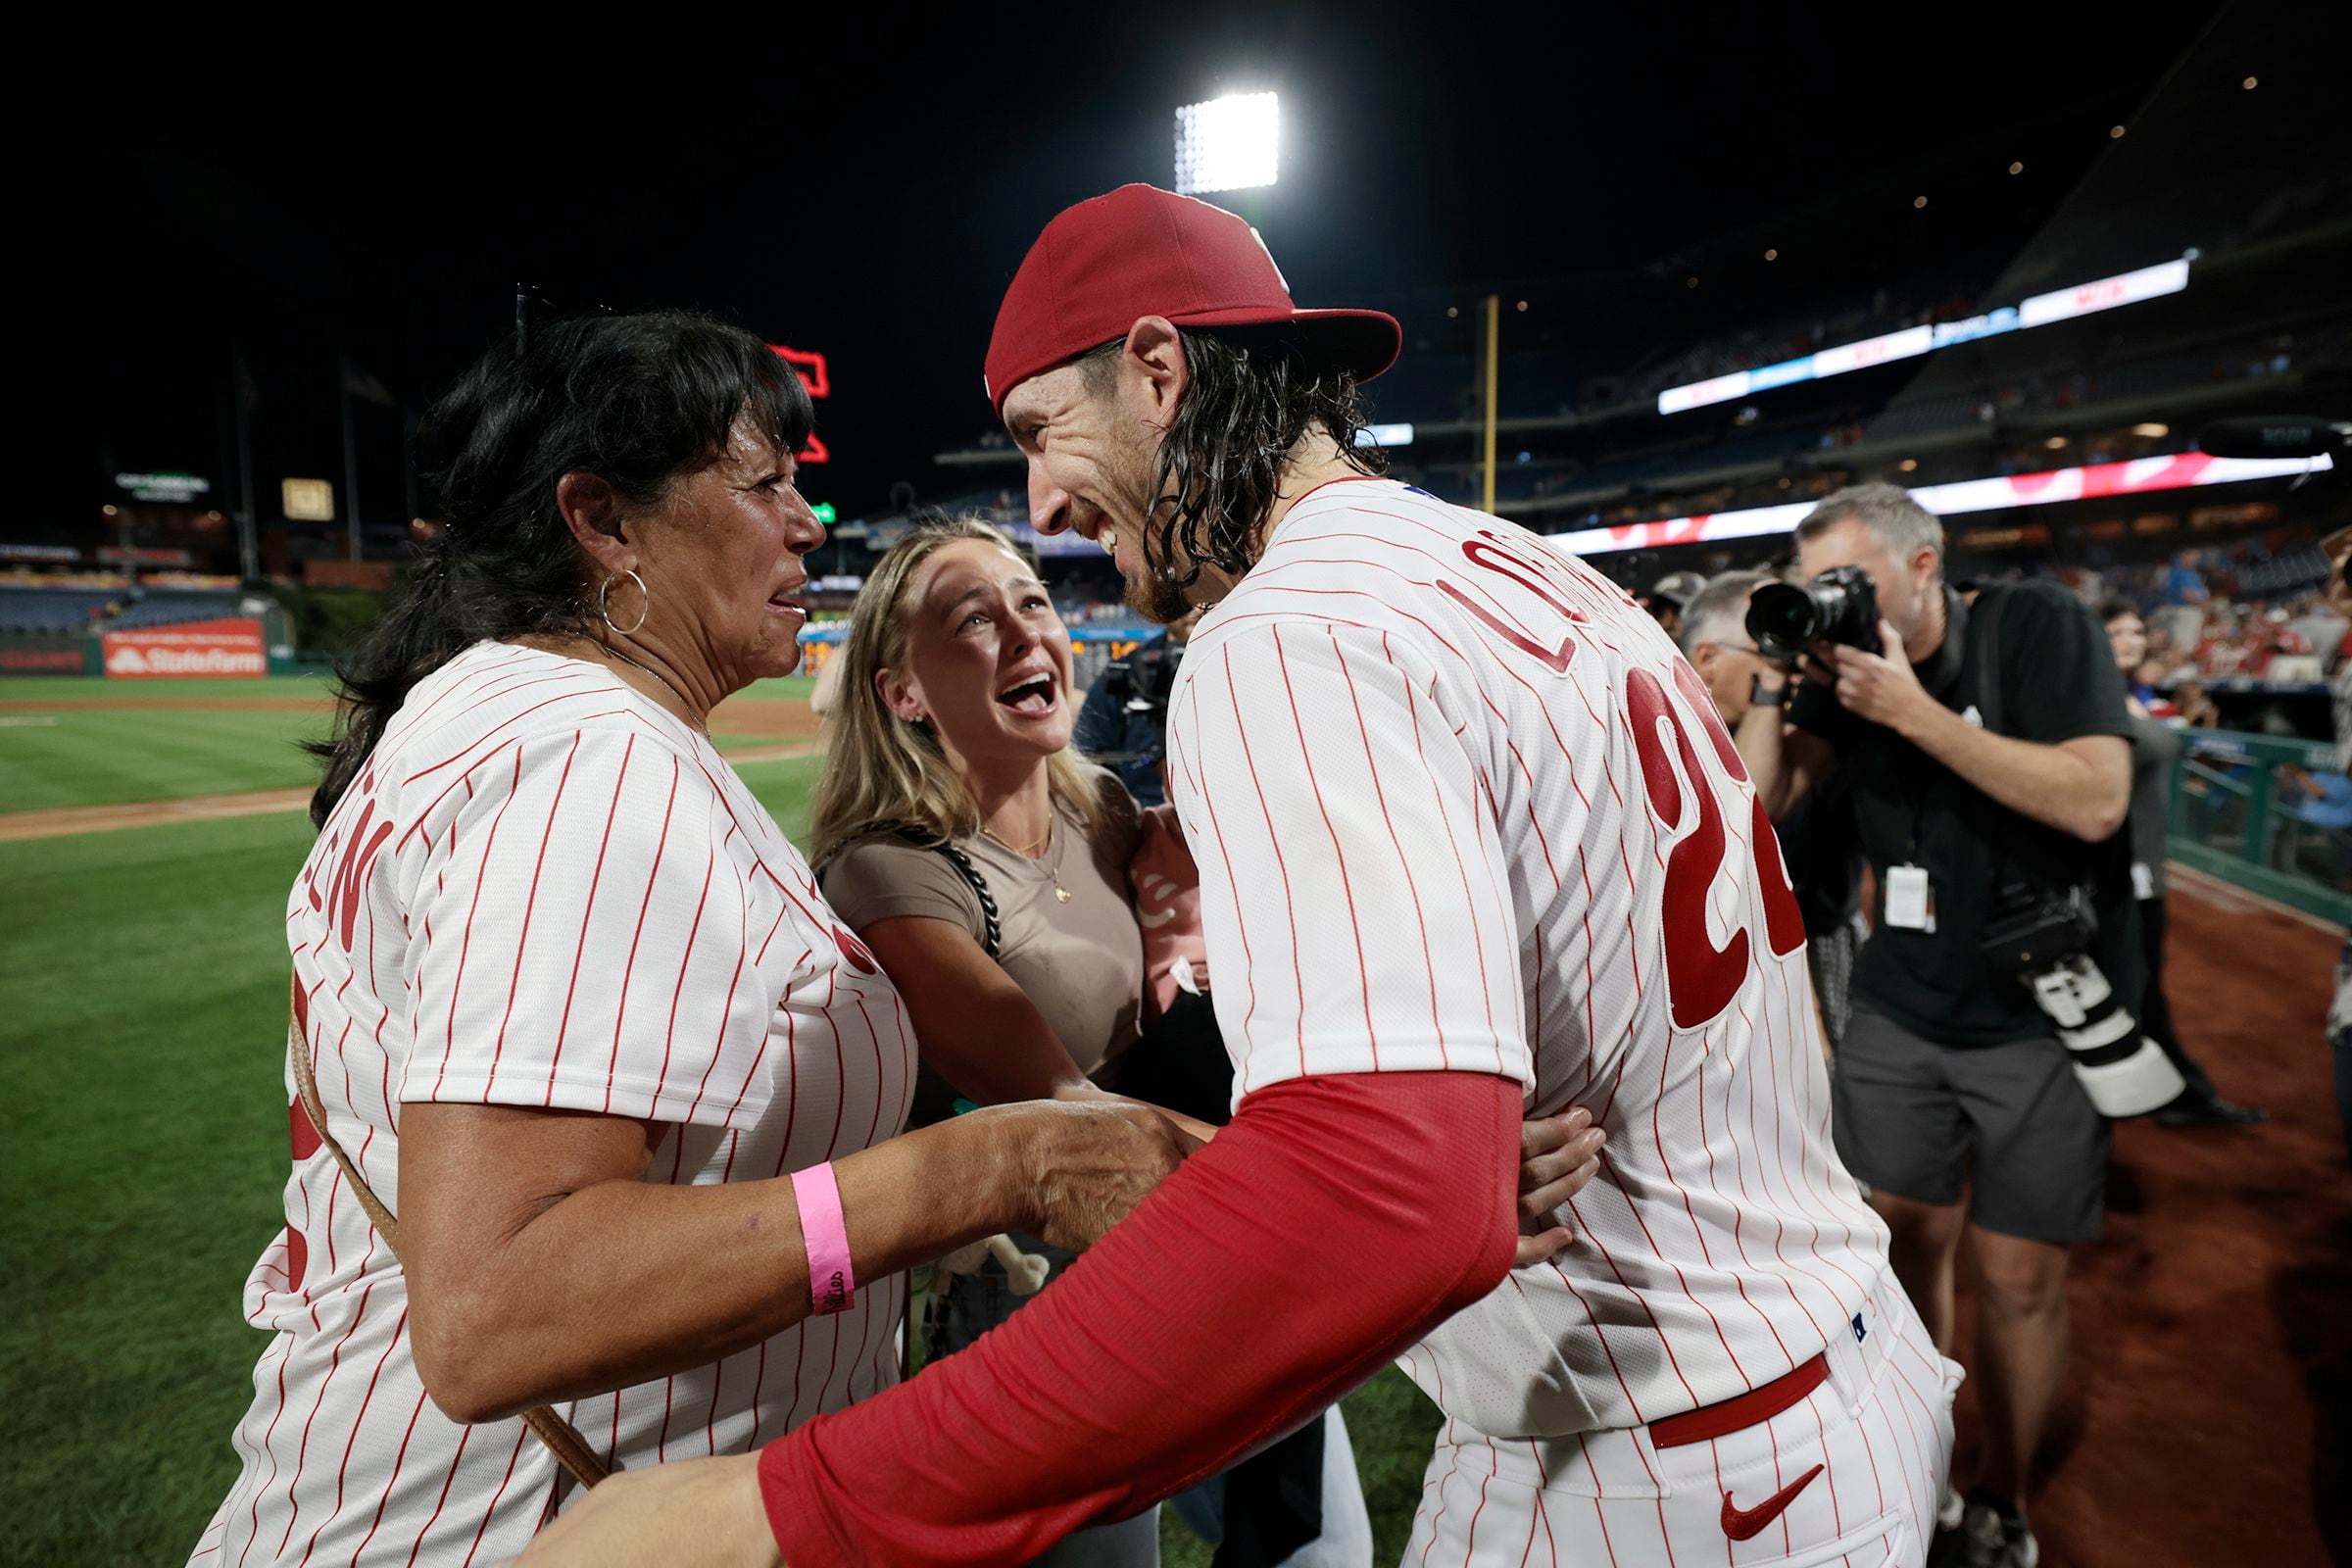 The Phillies pitcher who married a movie star's daughter and was